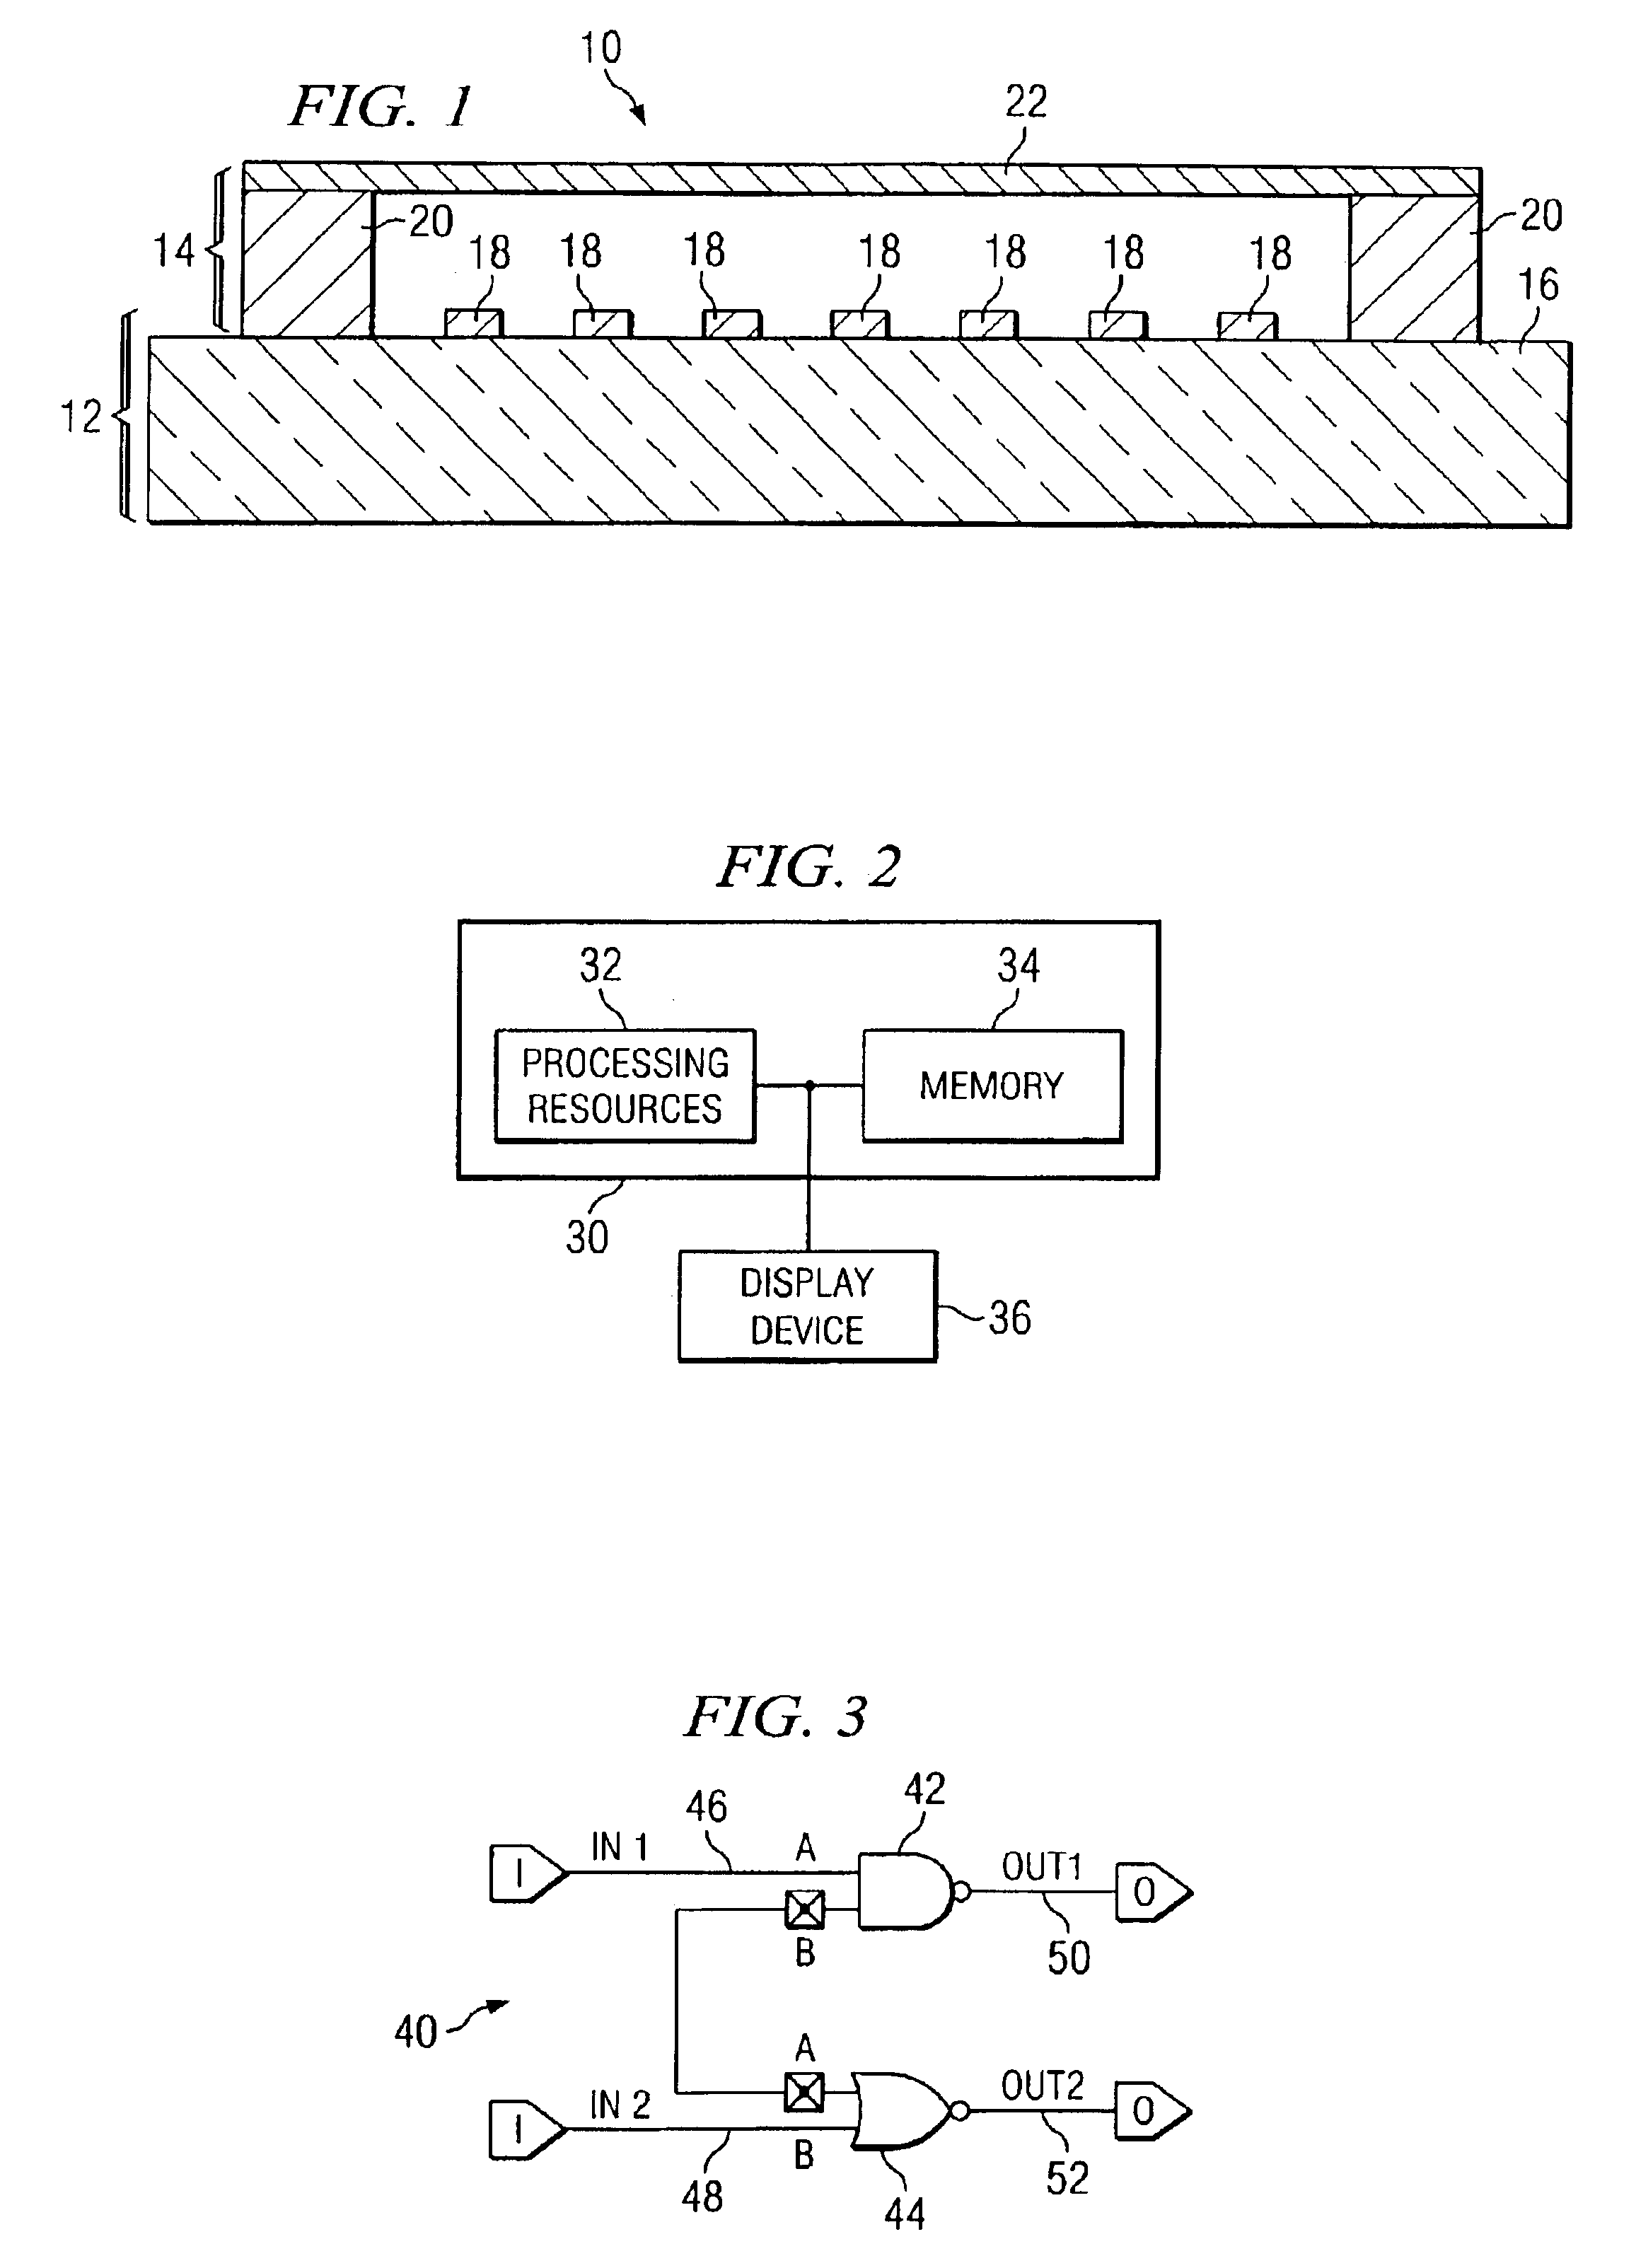 System and method for generating a mask layout file to reduce power supply voltage fluctuations in an integrated circuit